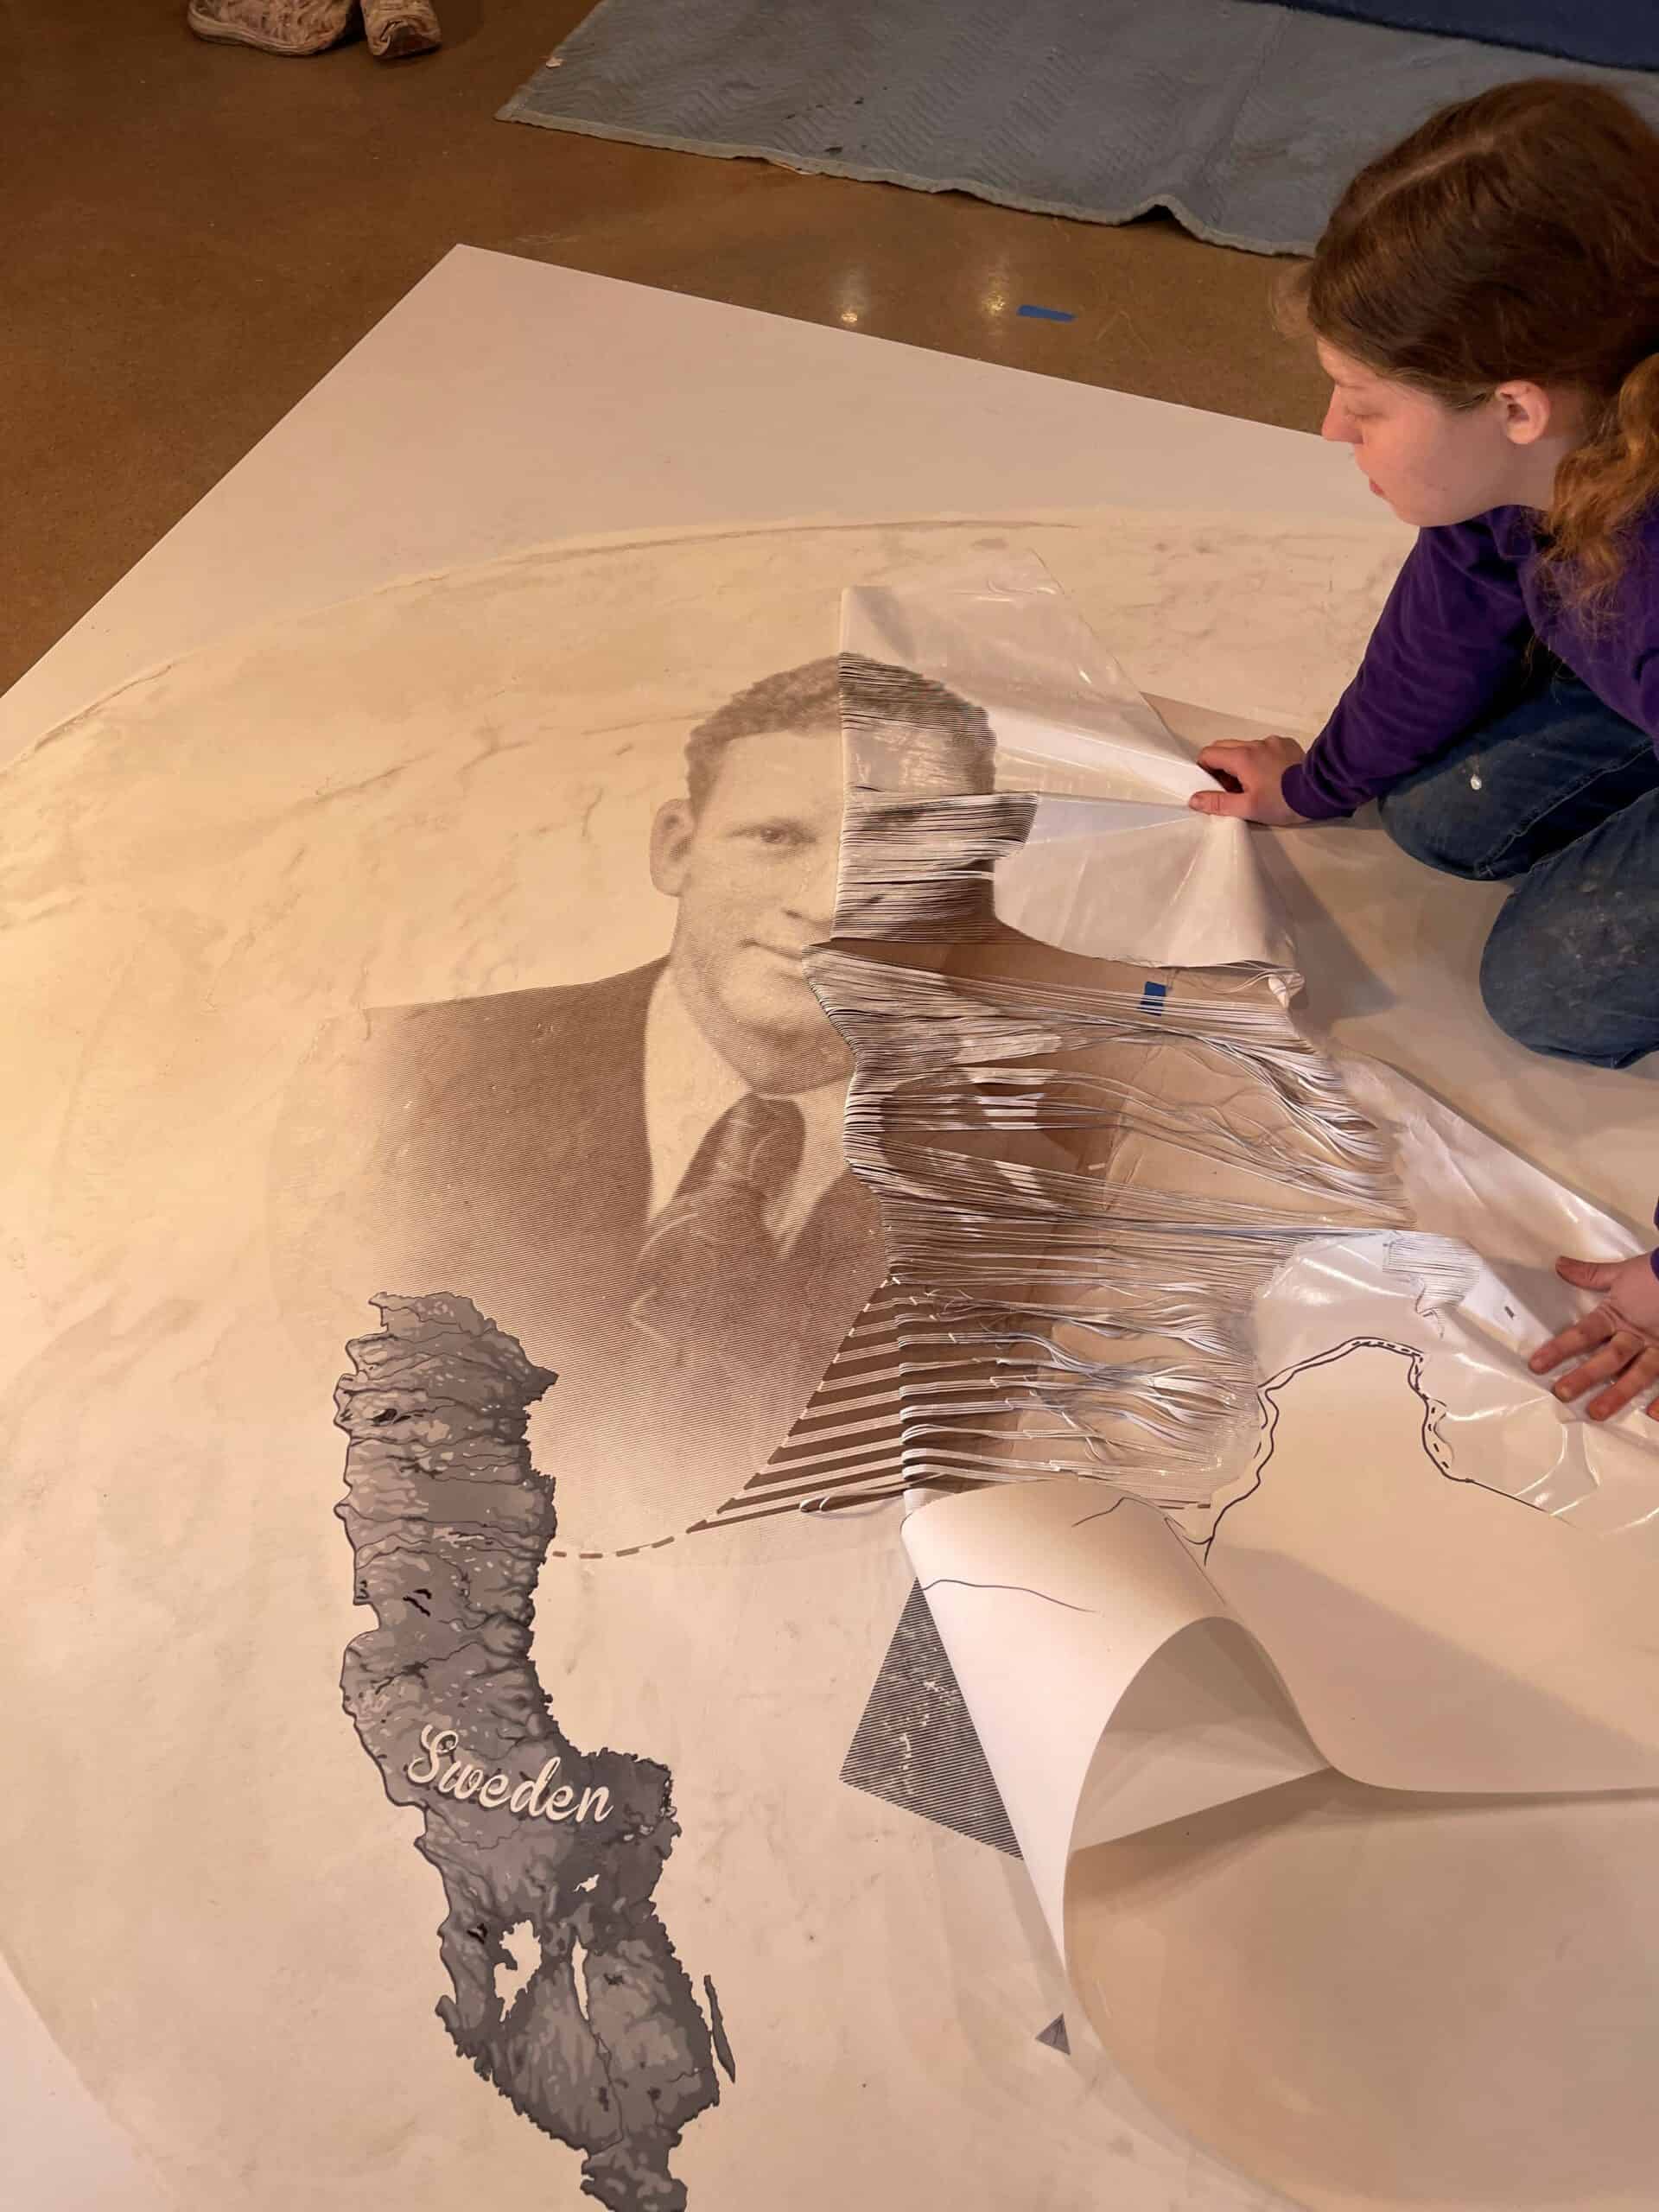 "The stencil is an amazing feat of technology once you see how it's done. It’ll kind of blow you away."